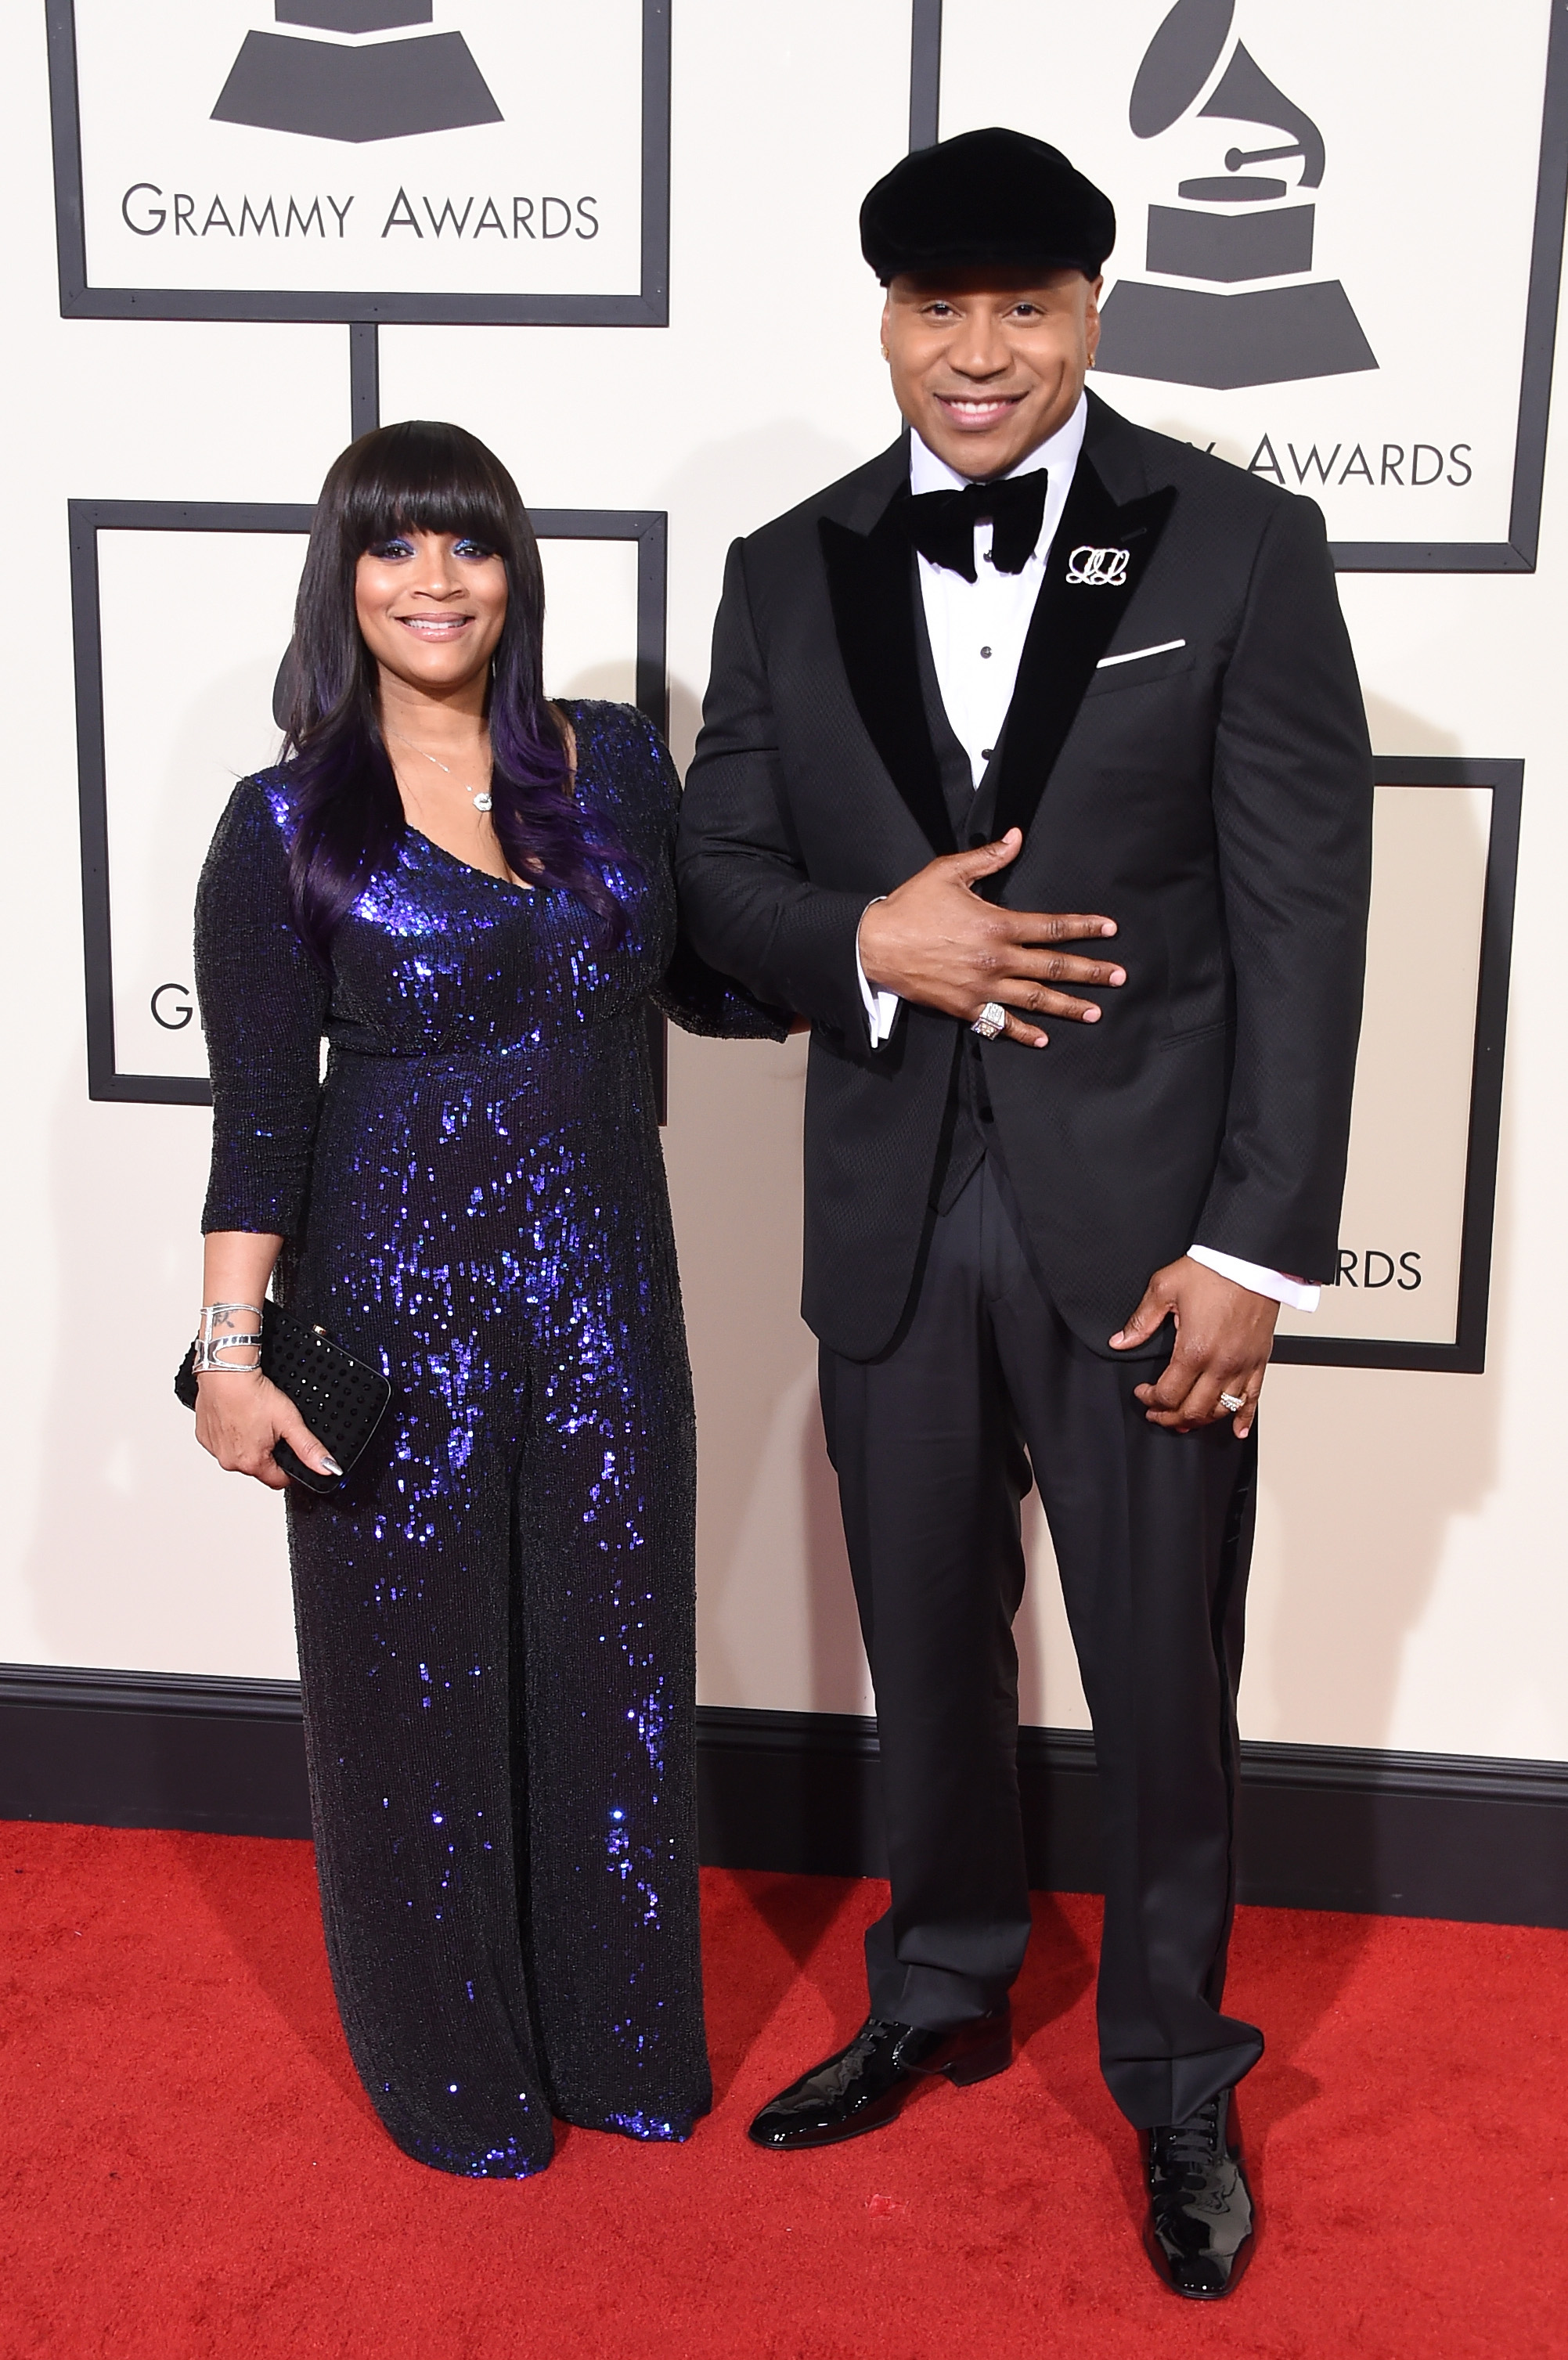 Simone Smith, left, and host LL Cool J, right, attend the 58th GRAMMY Awards at Staples Center on Feb. 15, 2016 in Los Angeles.